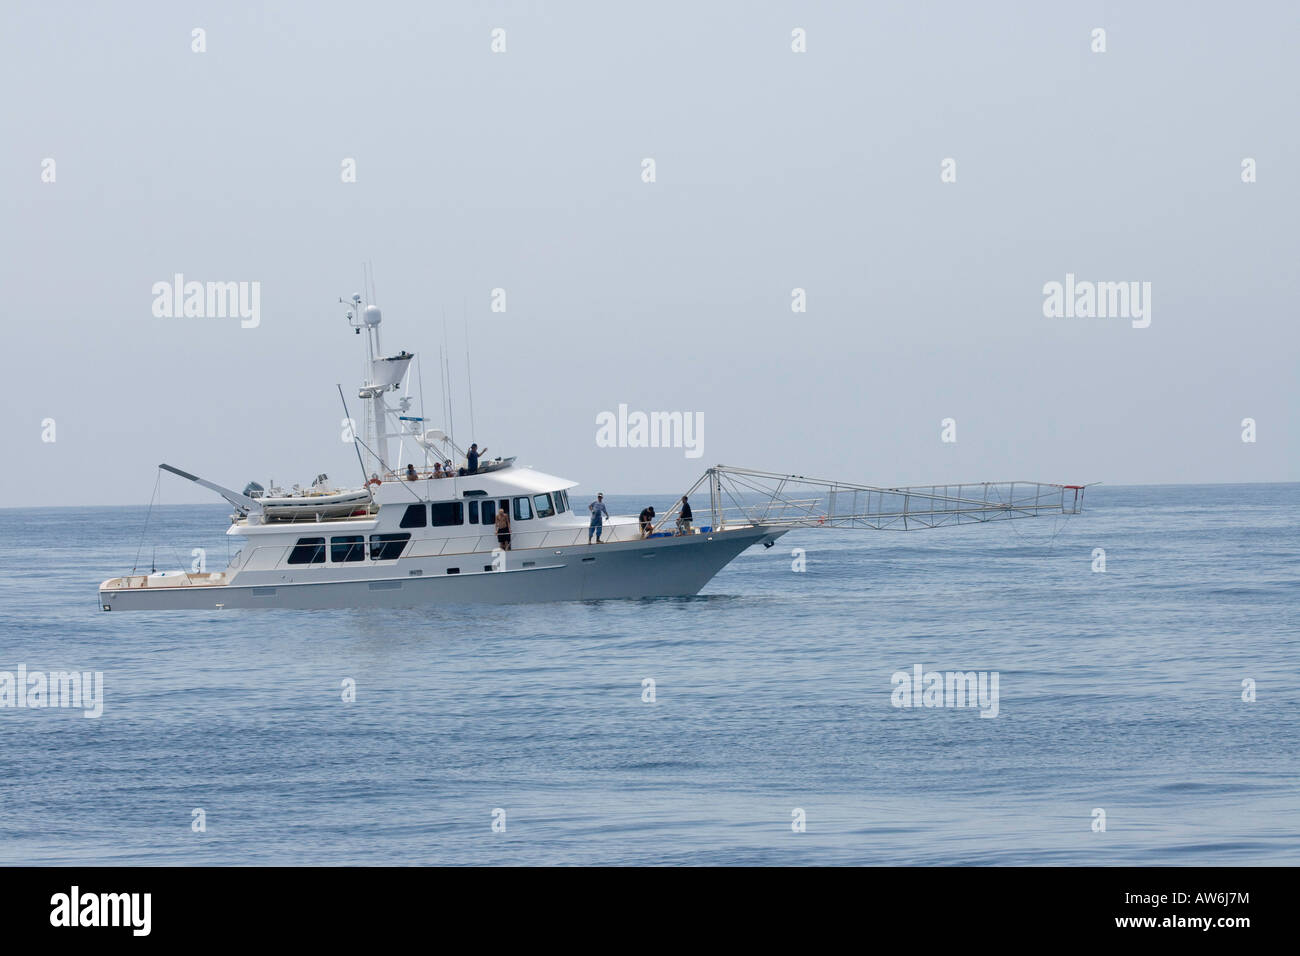 The extension off the bow of this commercial fishing vessel is for harpooning swordfish, Catalina Island, California, USA. Stock Photo